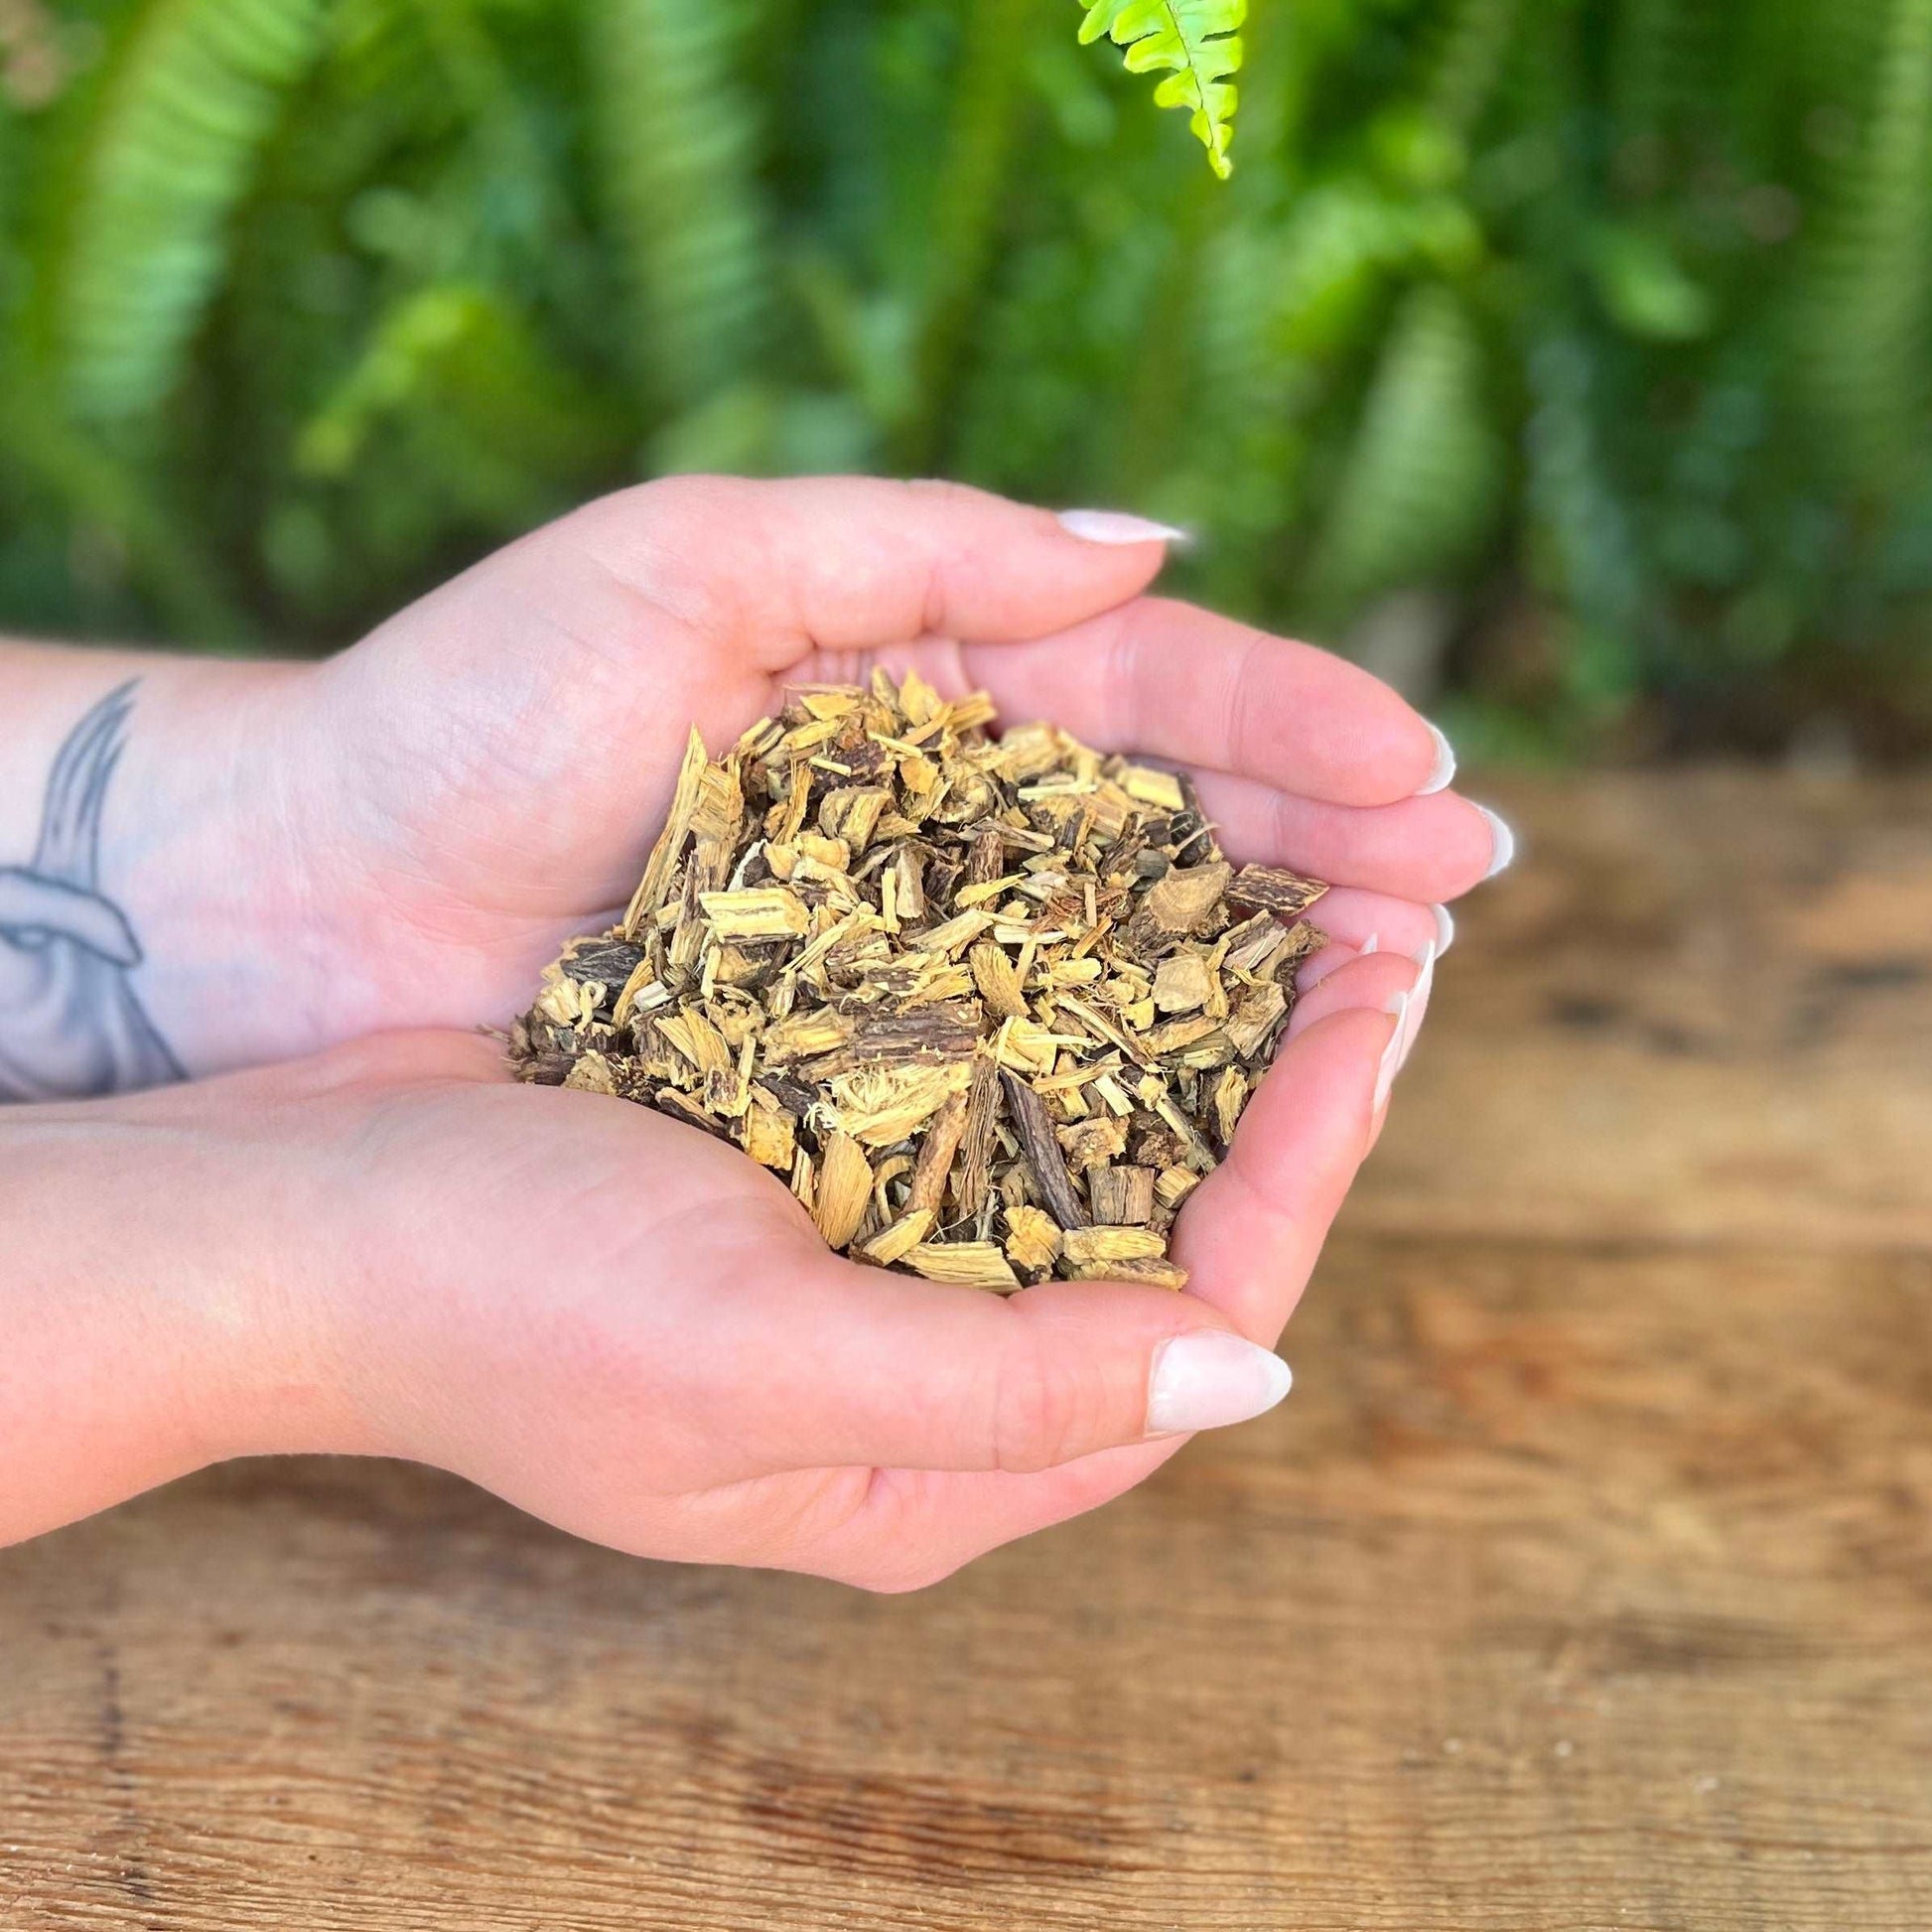 1 ounce Organic Licorice Root - Sweeten your herbal blends with organic Licorice Root. Revered for its traditional uses, Licorice Root is believed to bring love, harmony, and positive energy. Immerse yourself in the organic sweetness of Licorice Root.